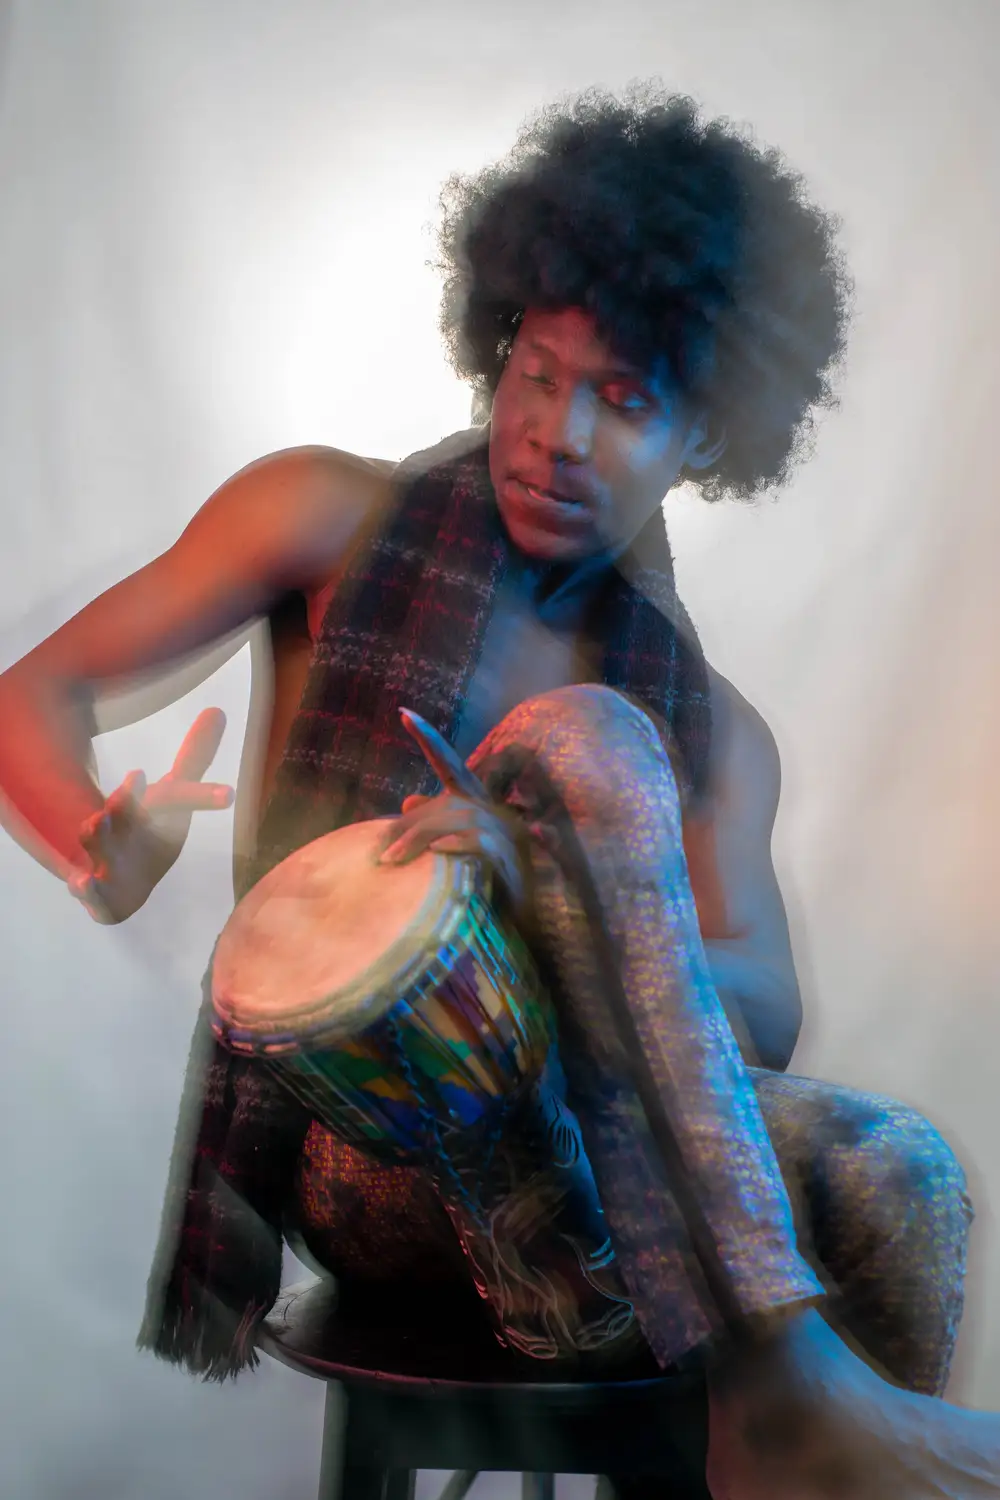 model on afro hairstyle plays drum 6